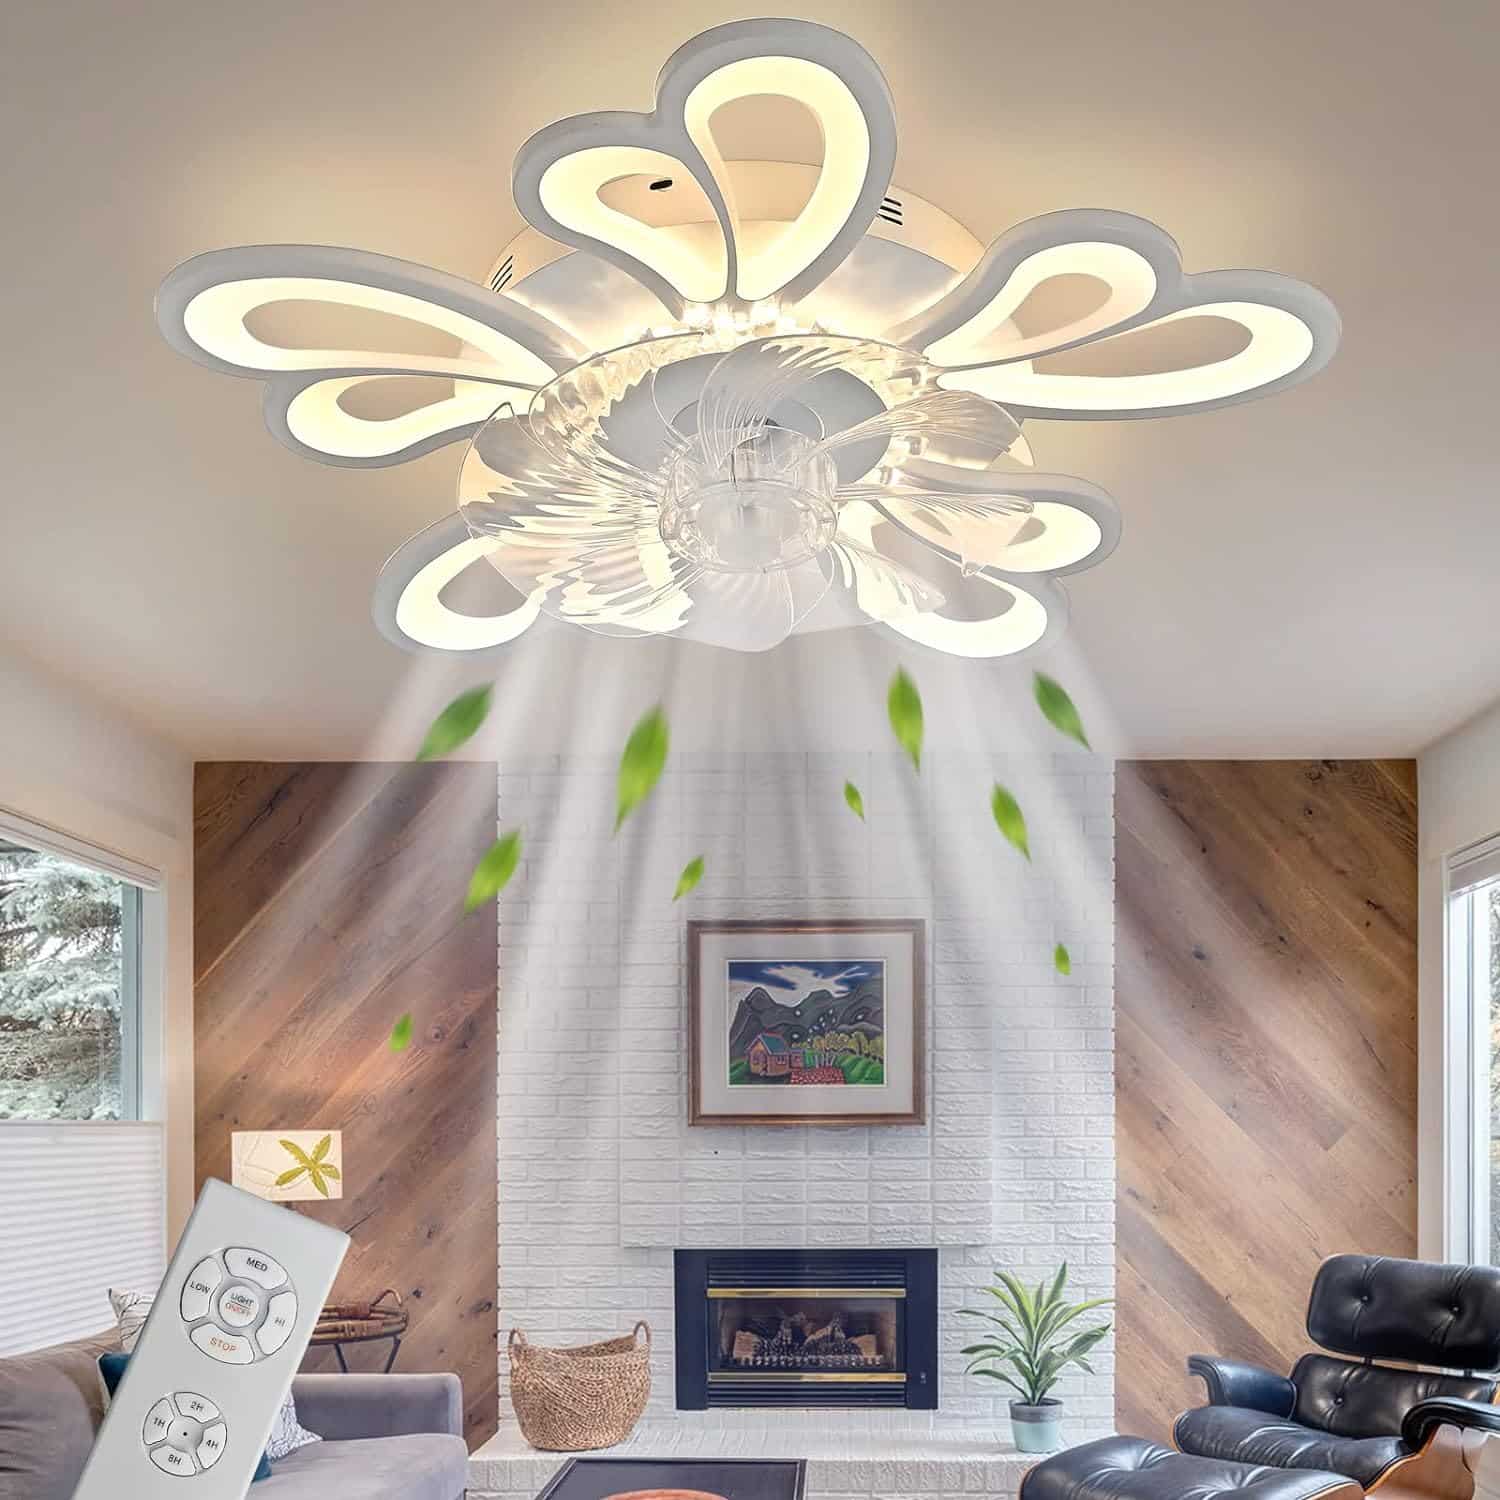 42 Inch Chandelier Ceiling Fan Modern Crystal Ceiling Fan with Lights Remote Control 6 Speed 3 Color Dimmable Silent Luxury Fandelier with Retractable Blades for Living Room Bedroom Decoration Gold